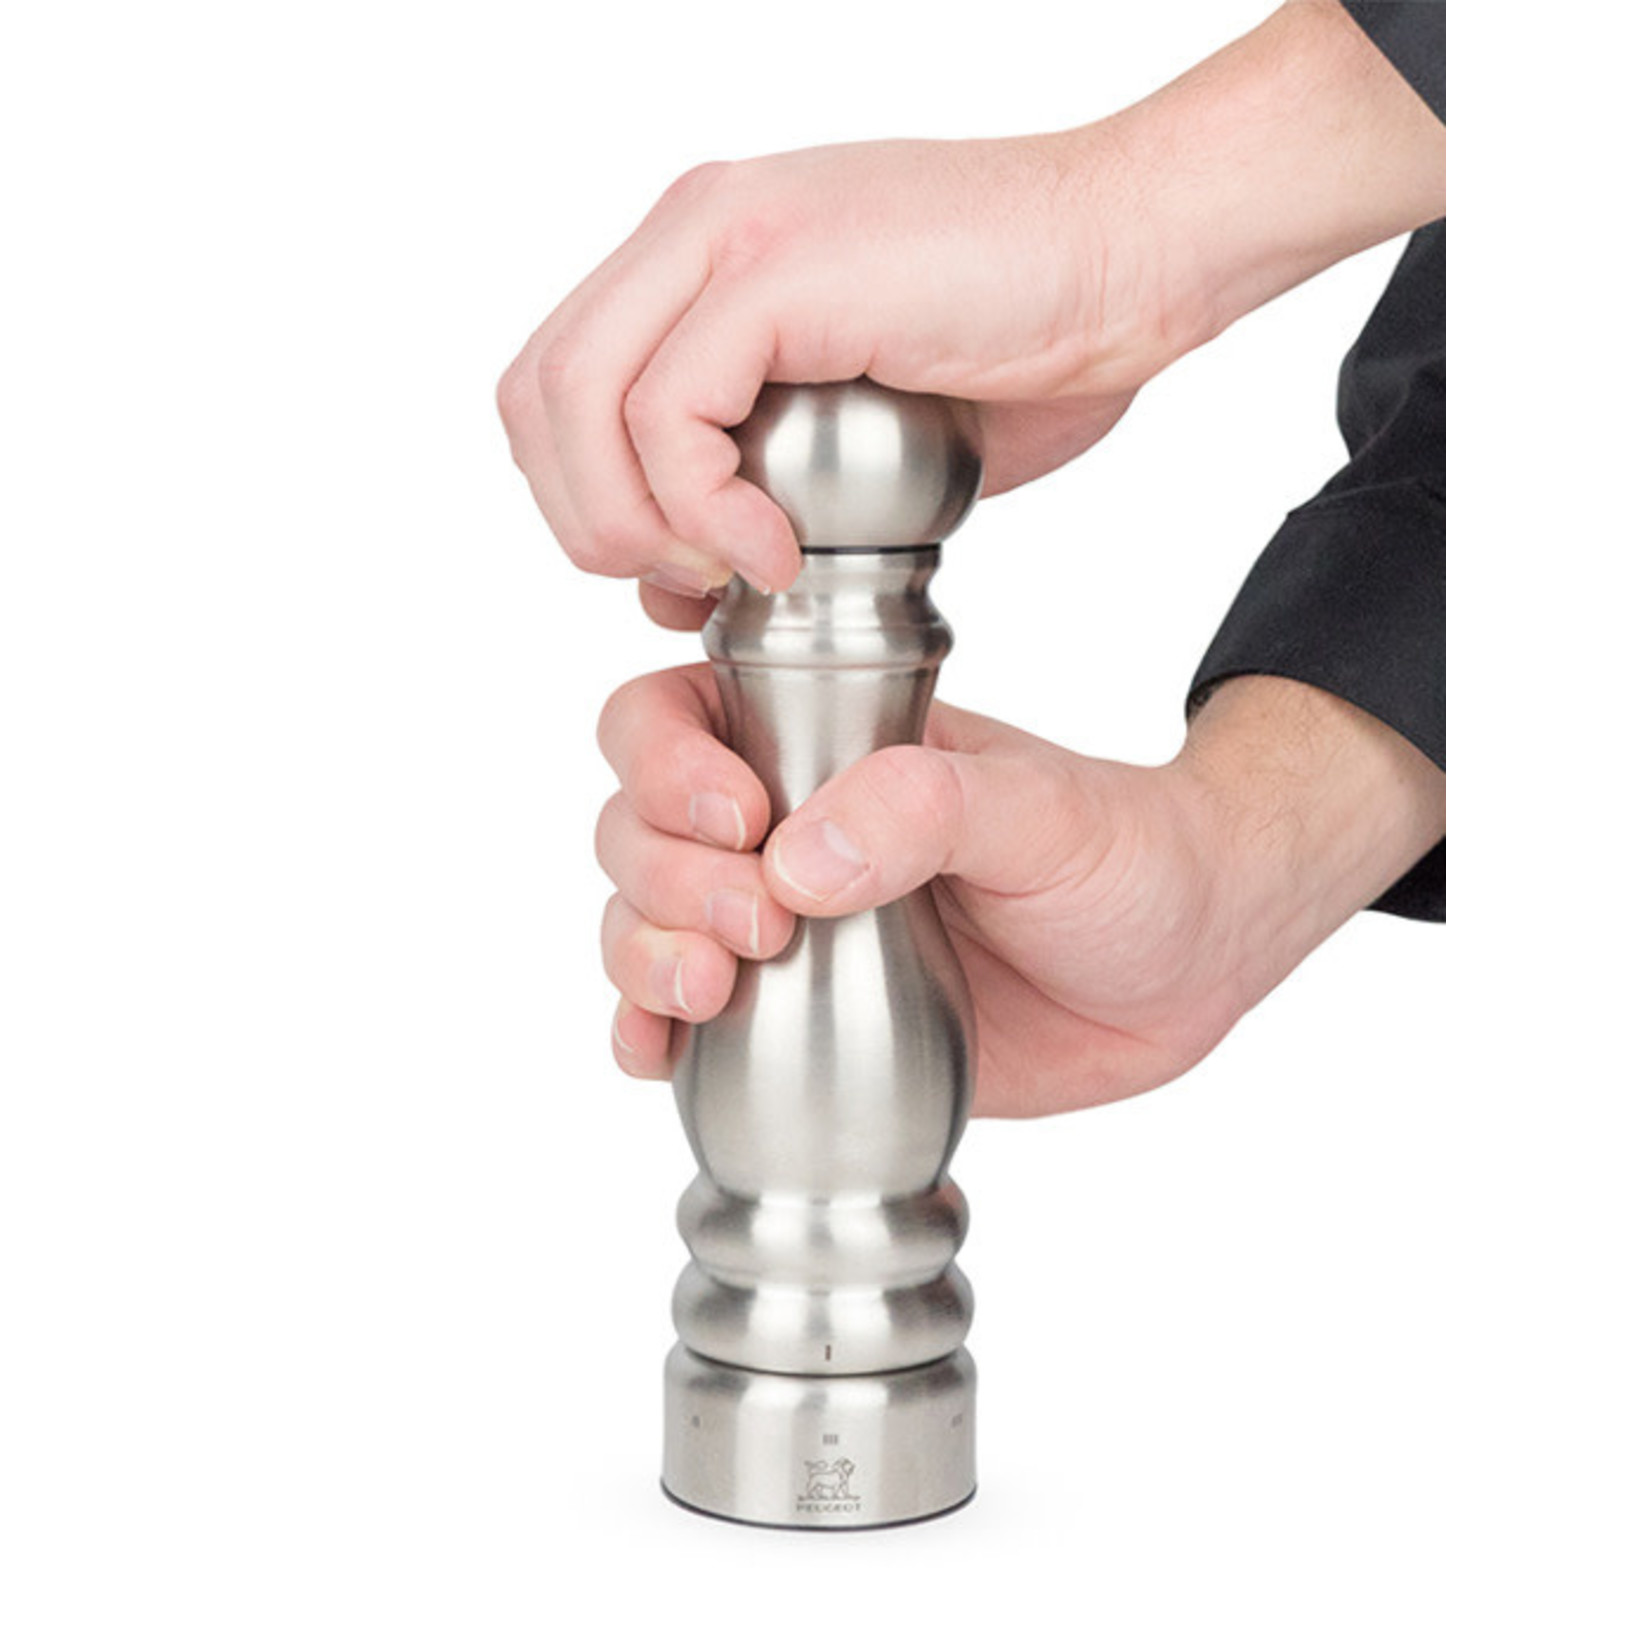 PEUGEOT PEUGEOT Paris CHEF USelect Pepper Mill 22cm - Stainless